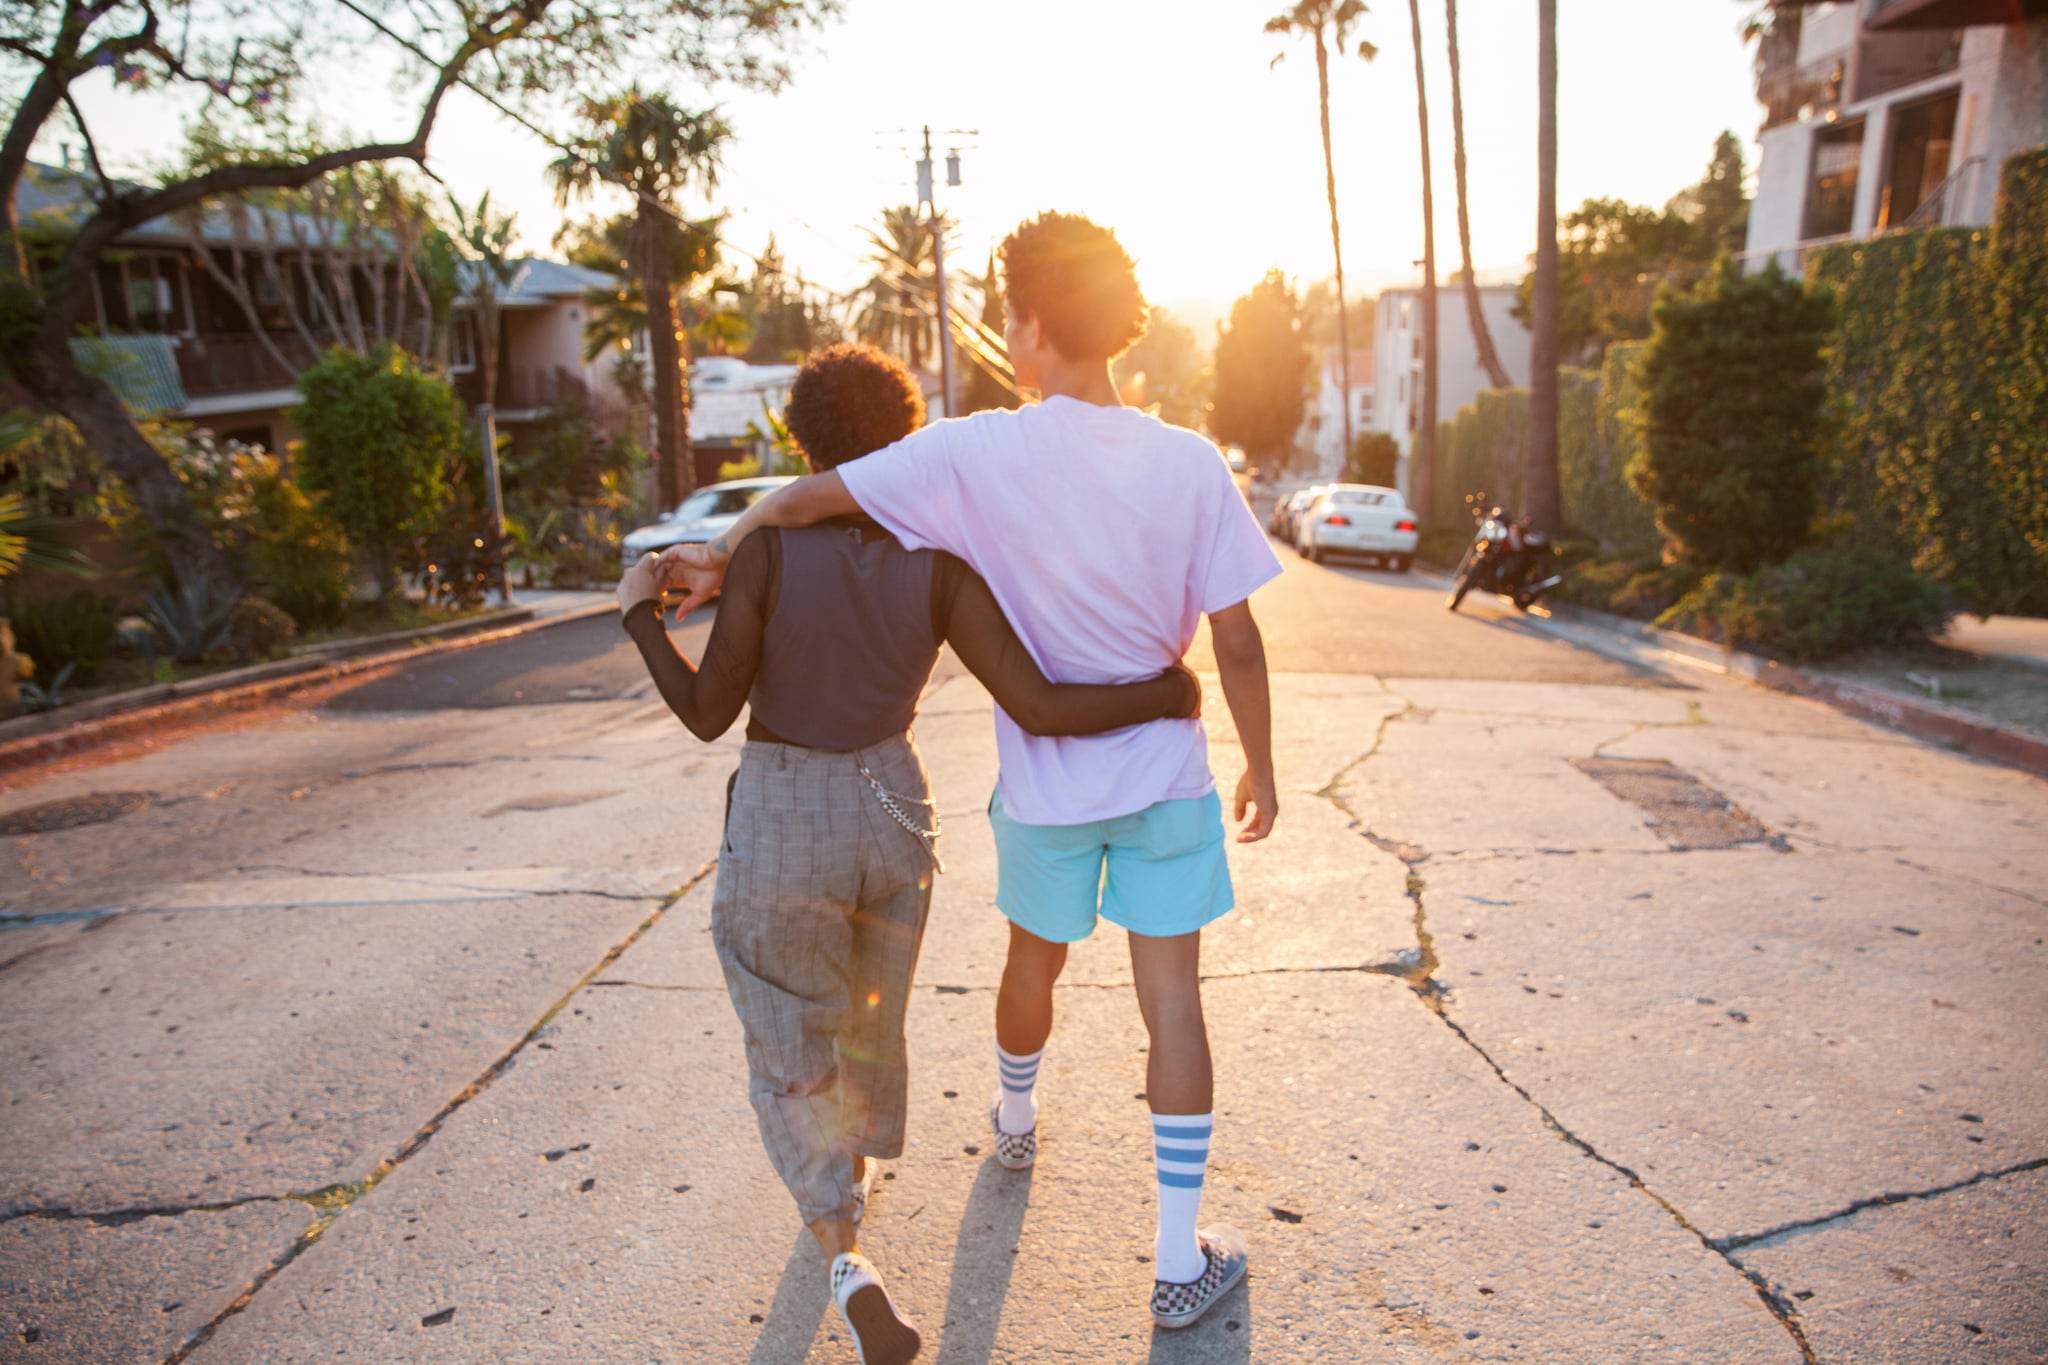 A young African American couple with their arms around each other walking down a suburban street at sunset, shot from behind